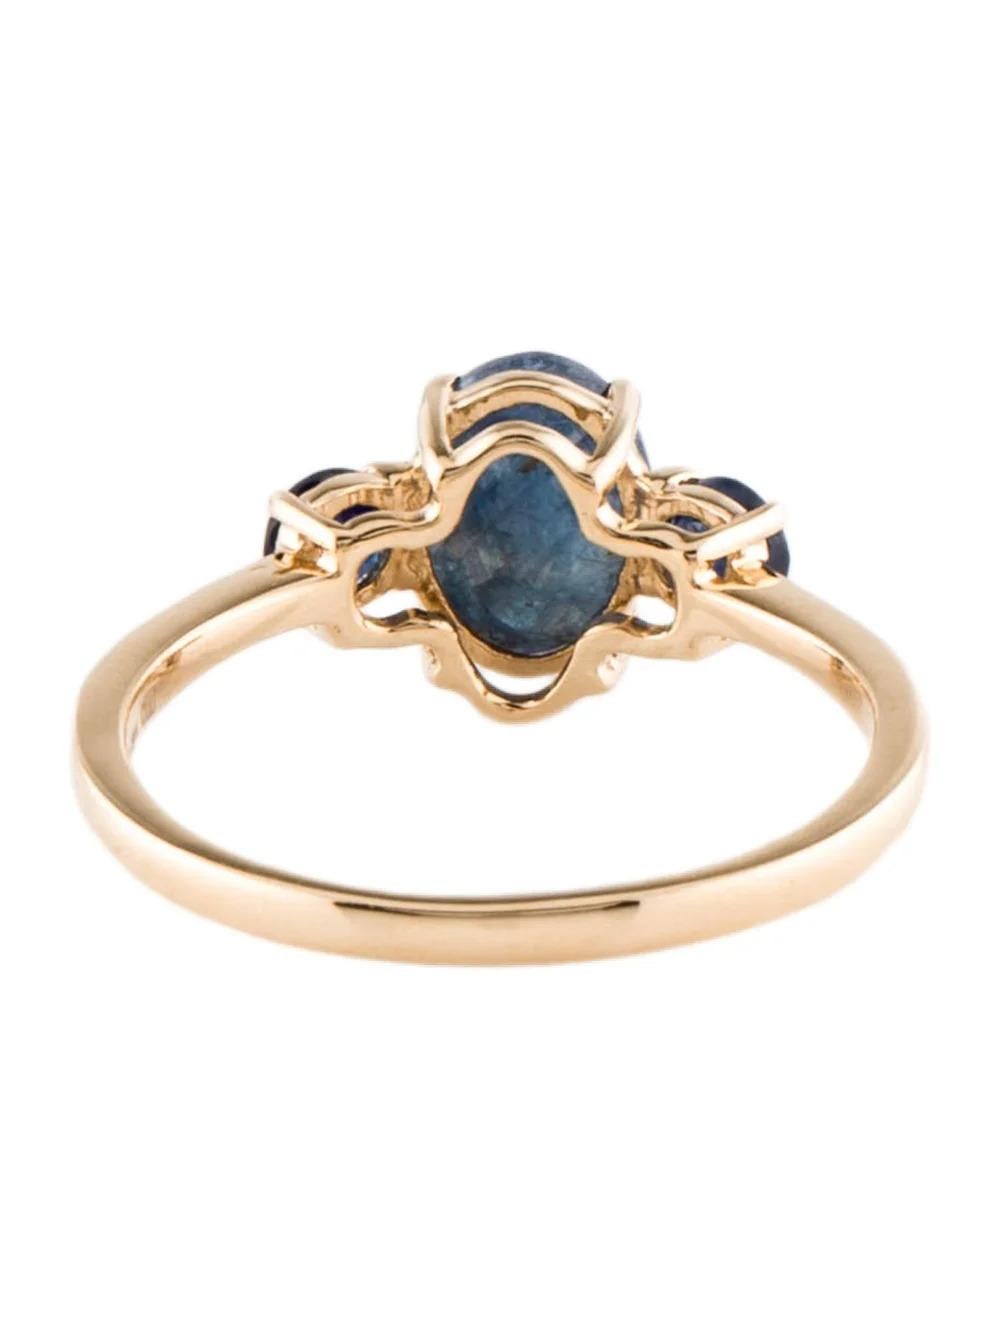 14K 1.27ct Sapphire Cocktail Ring Size 6.75: Yellow Gold Statement Jewelry In New Condition For Sale In Holtsville, NY